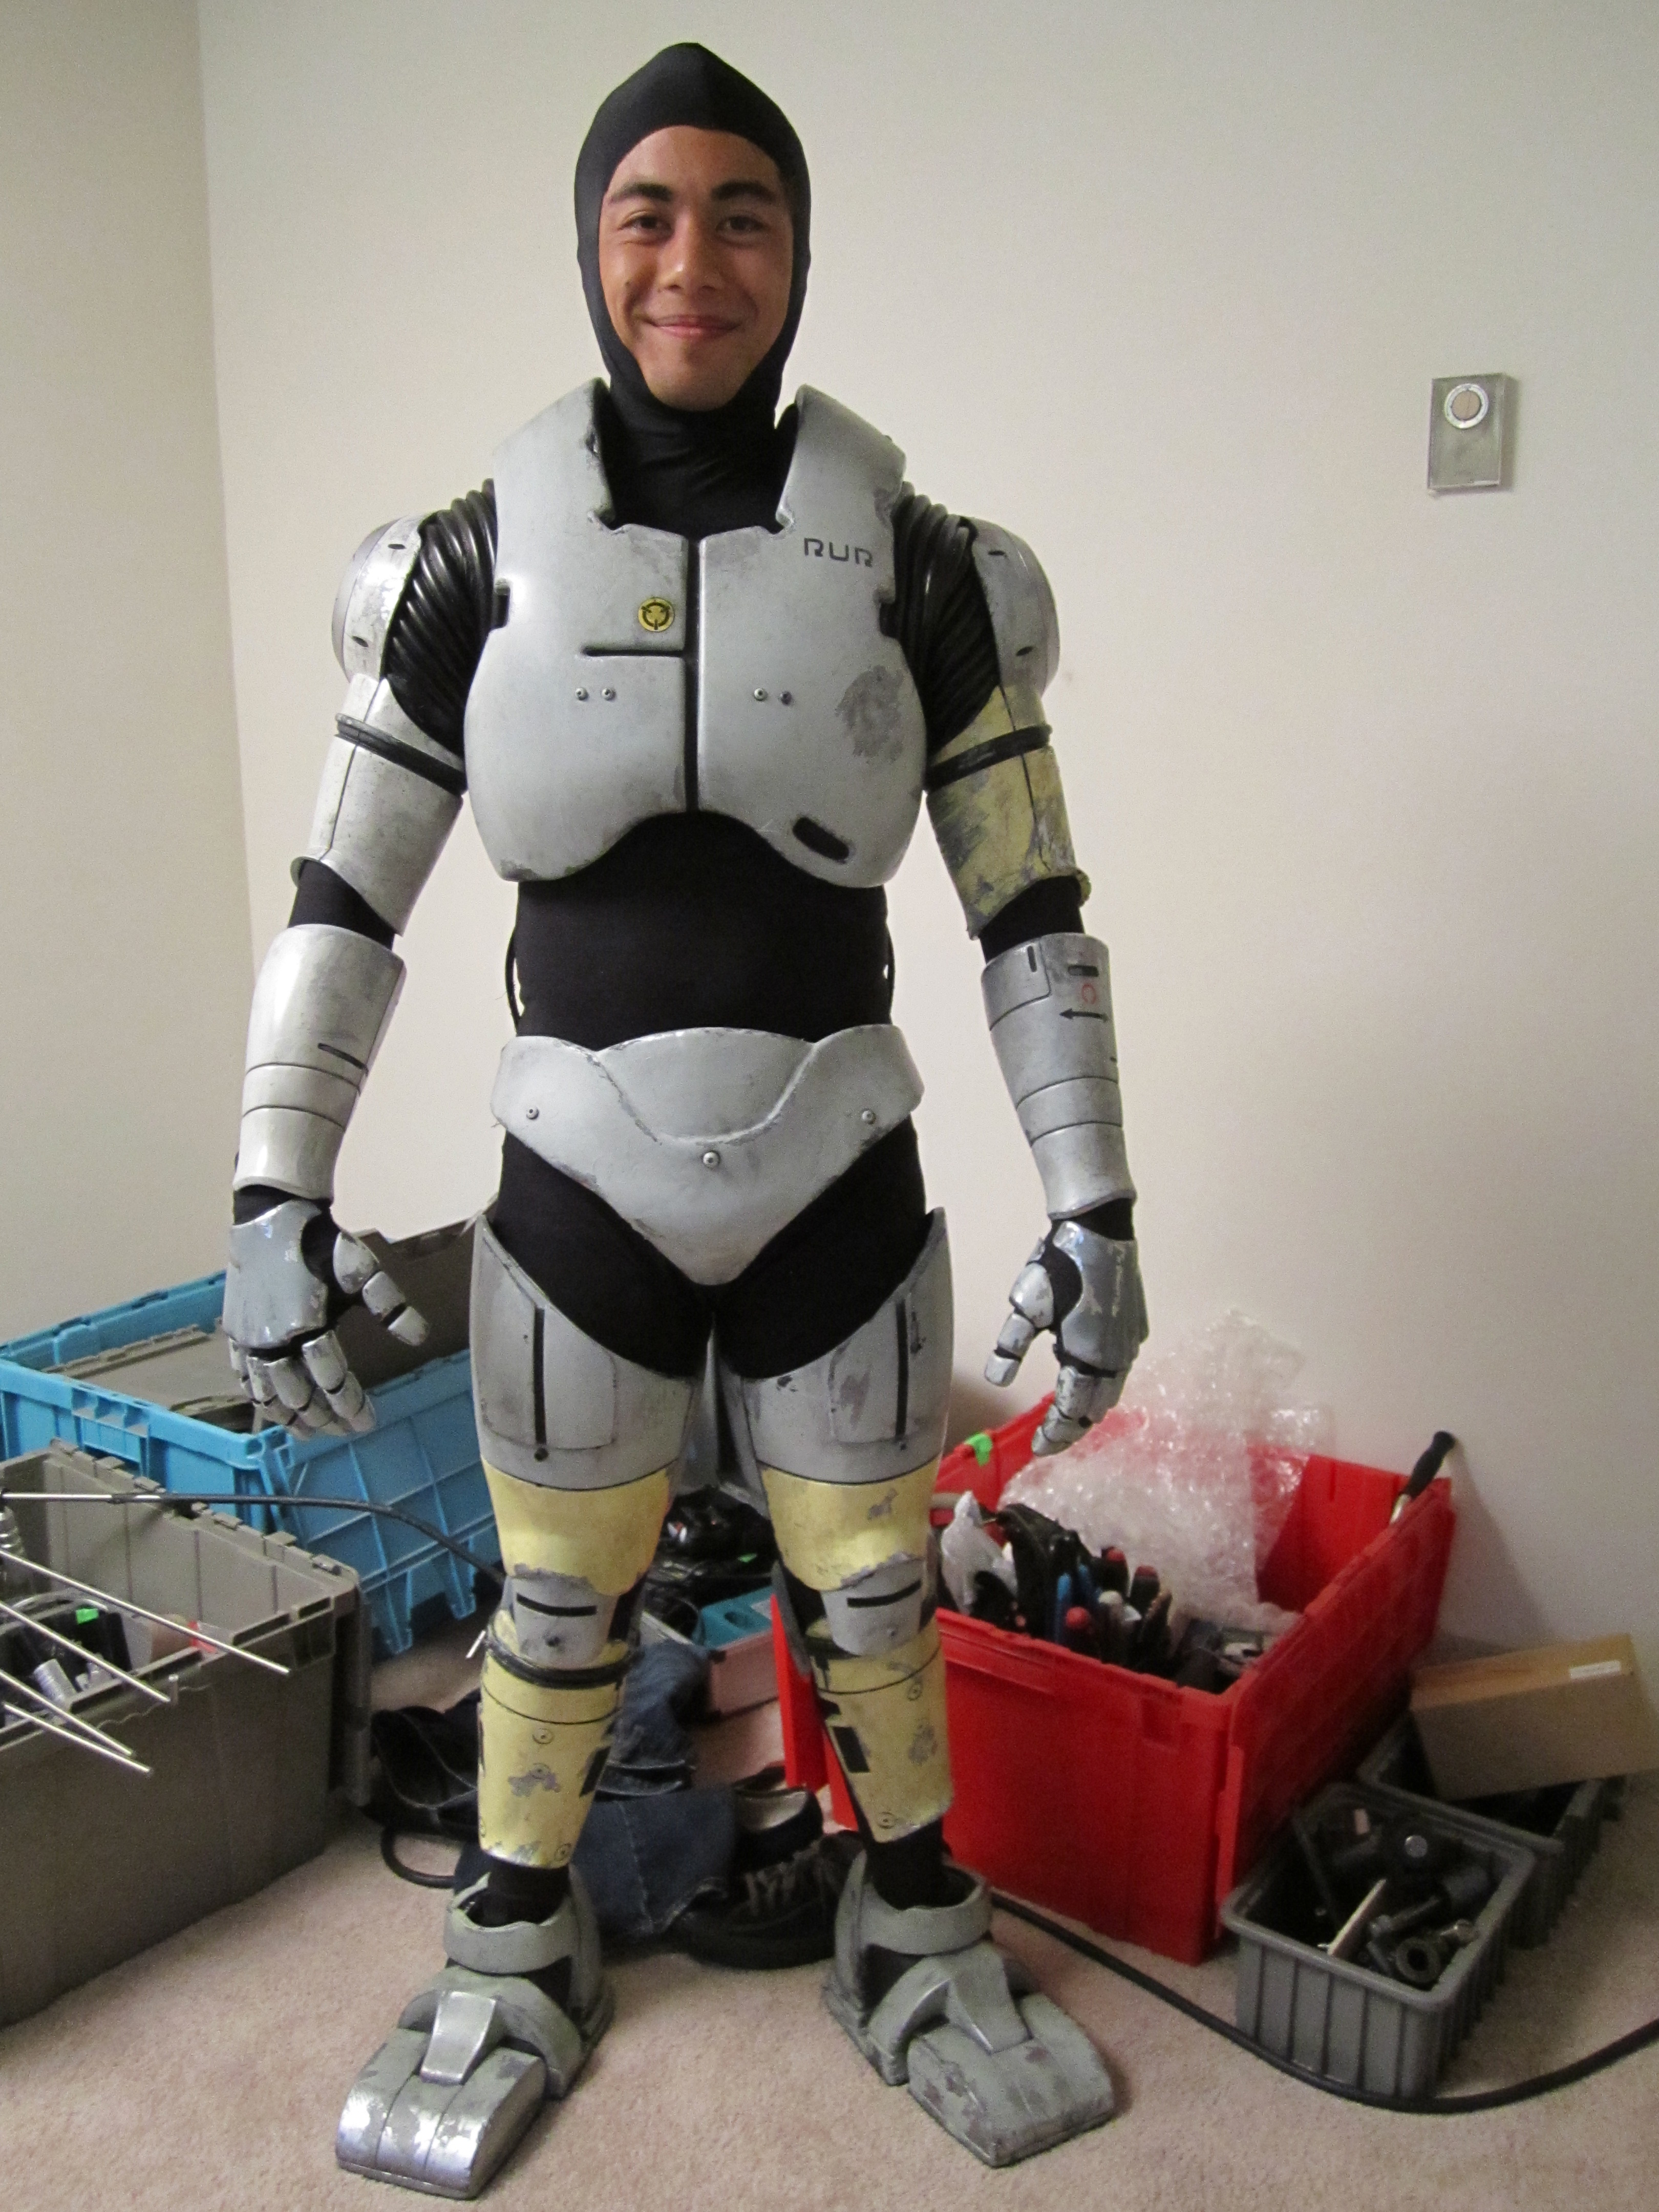 On set in my Robot suit. Carl's Jr. Commercial